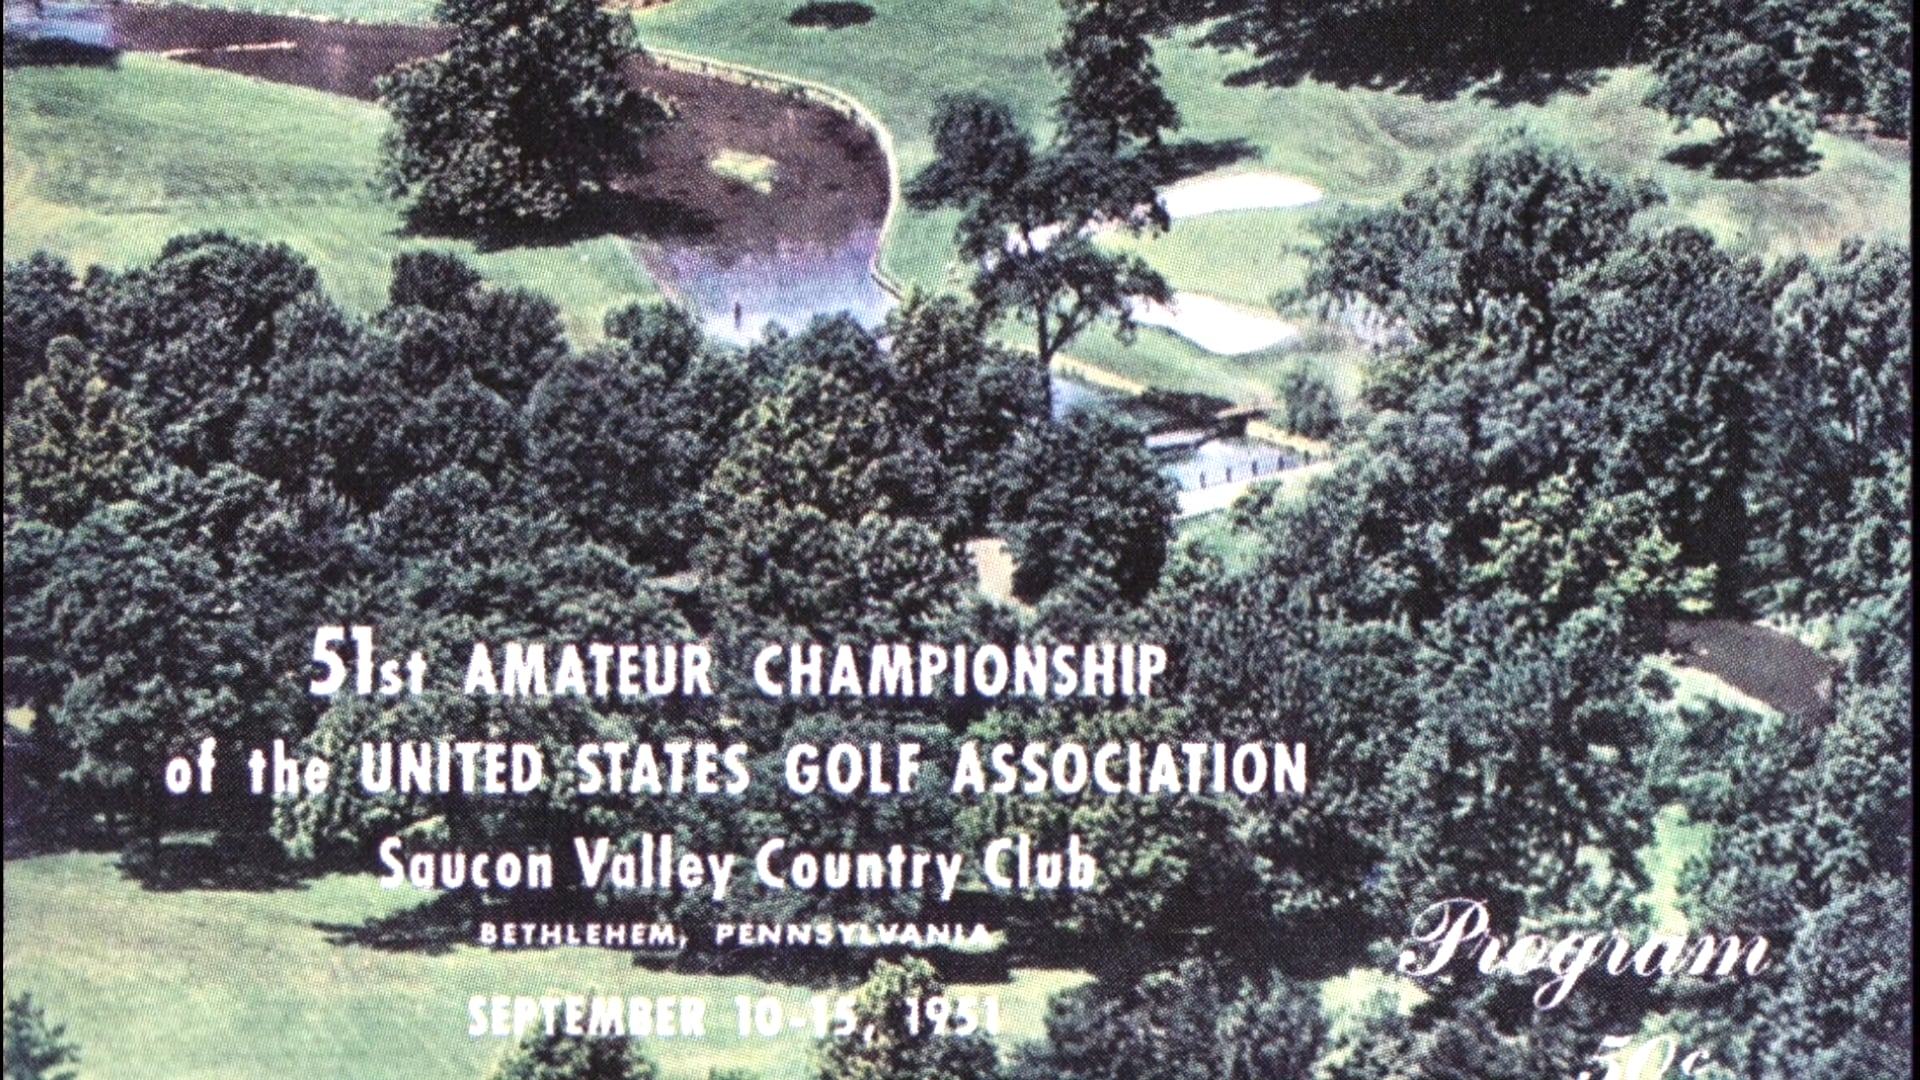 CLIENT: Saucon Valley Country Club